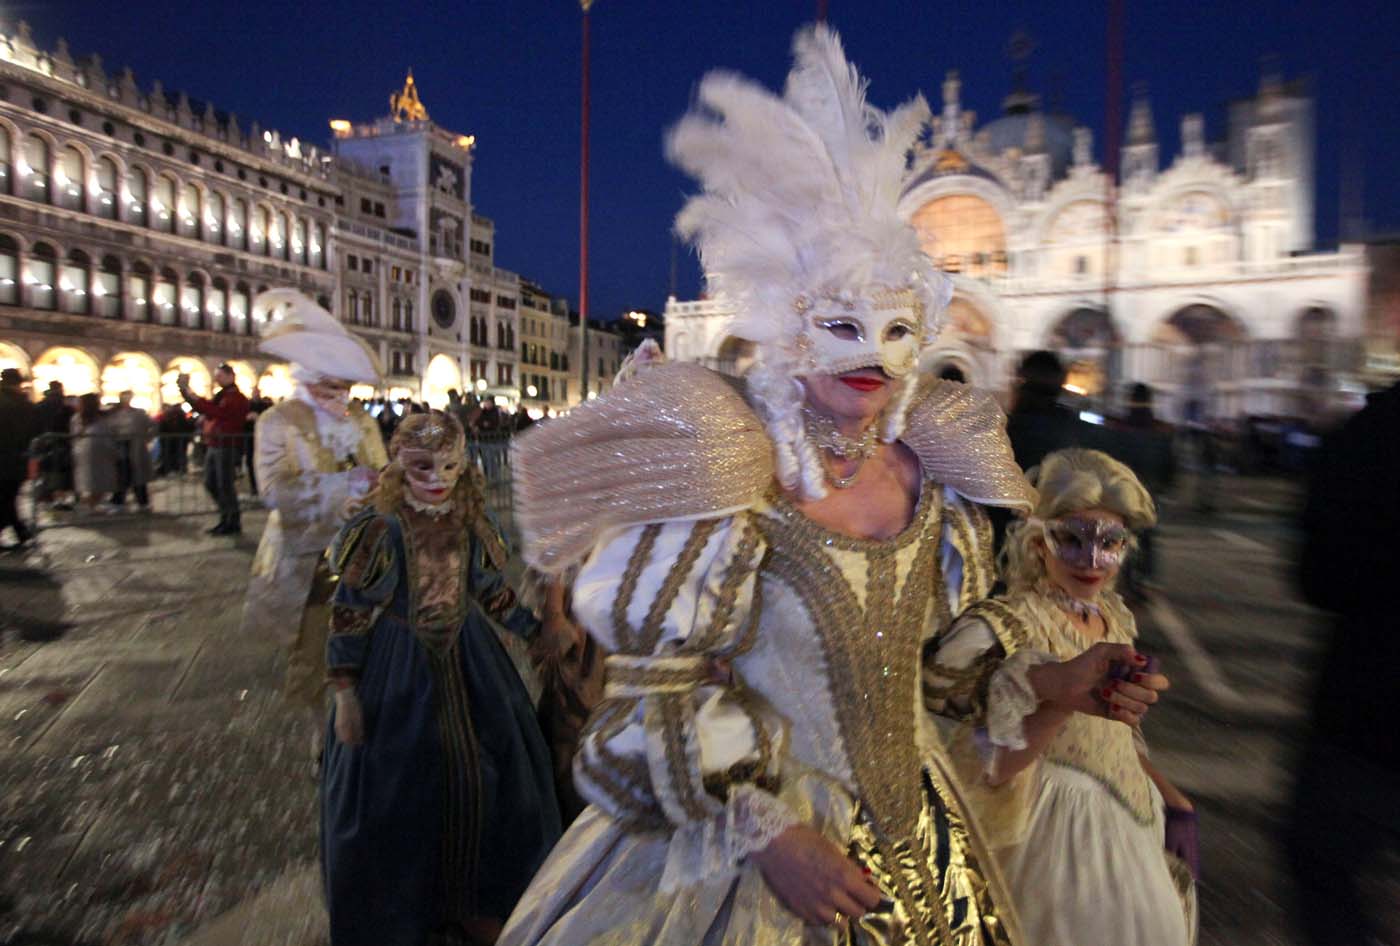 Masked revellers walk on St. Mark's Square during the Venice Carnival in Venice, Italy February 18, 2017. REUTERS/Fabrizio Bensch